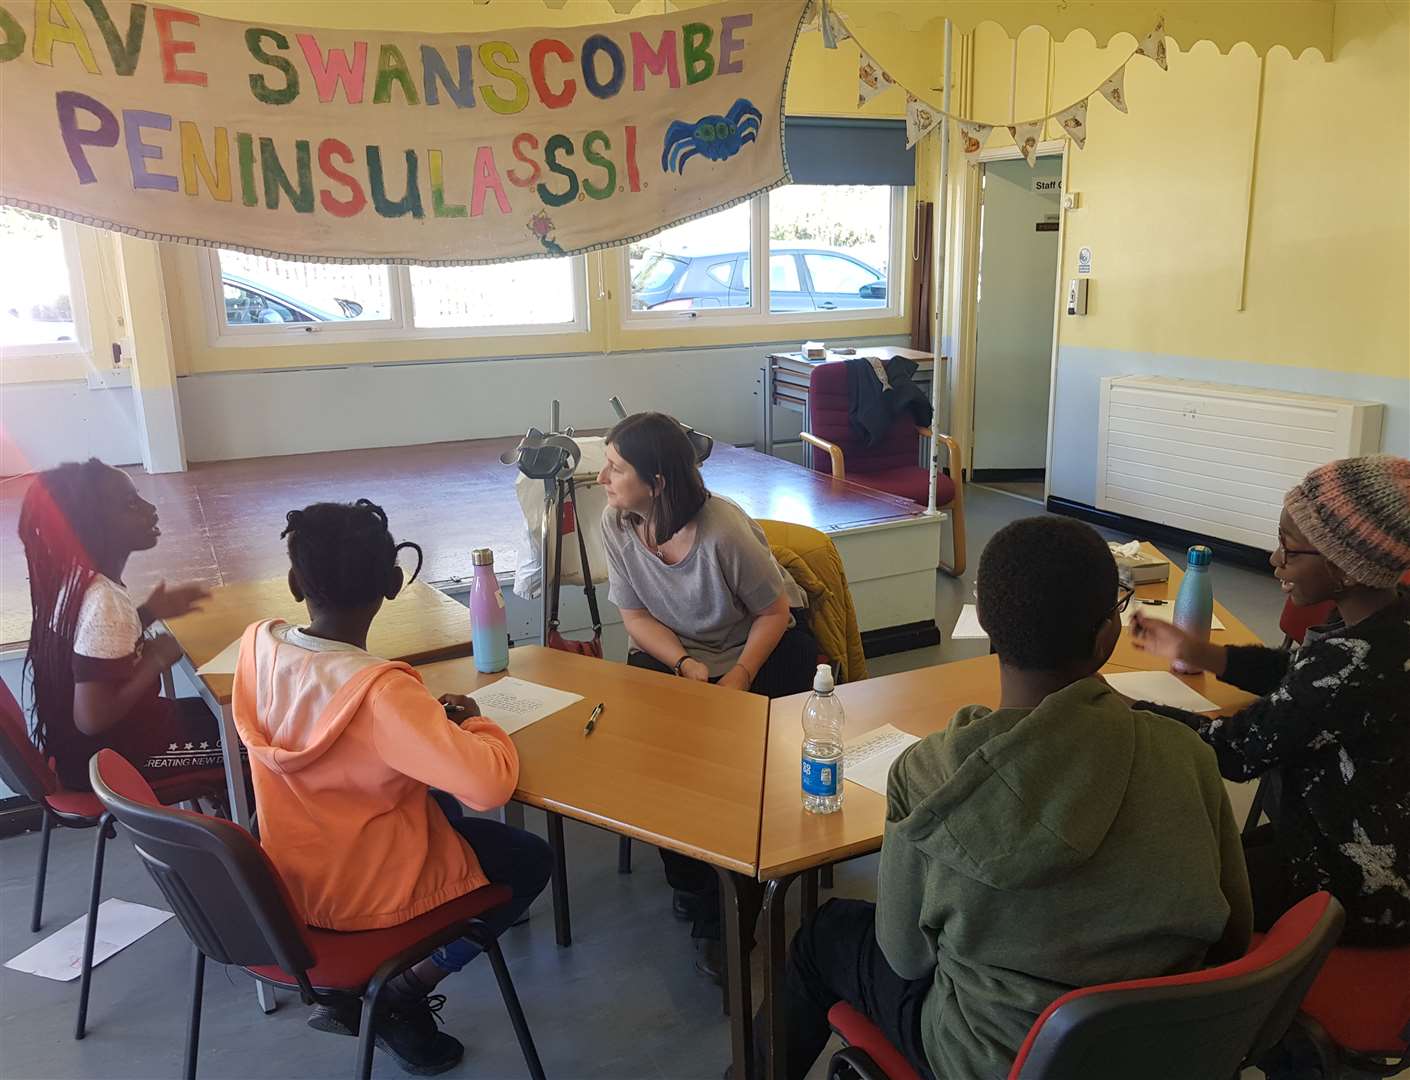 Children wrote poems with the assistance of a local poet. Photo: Laura Edie/ Save Swanscombe Peninsula